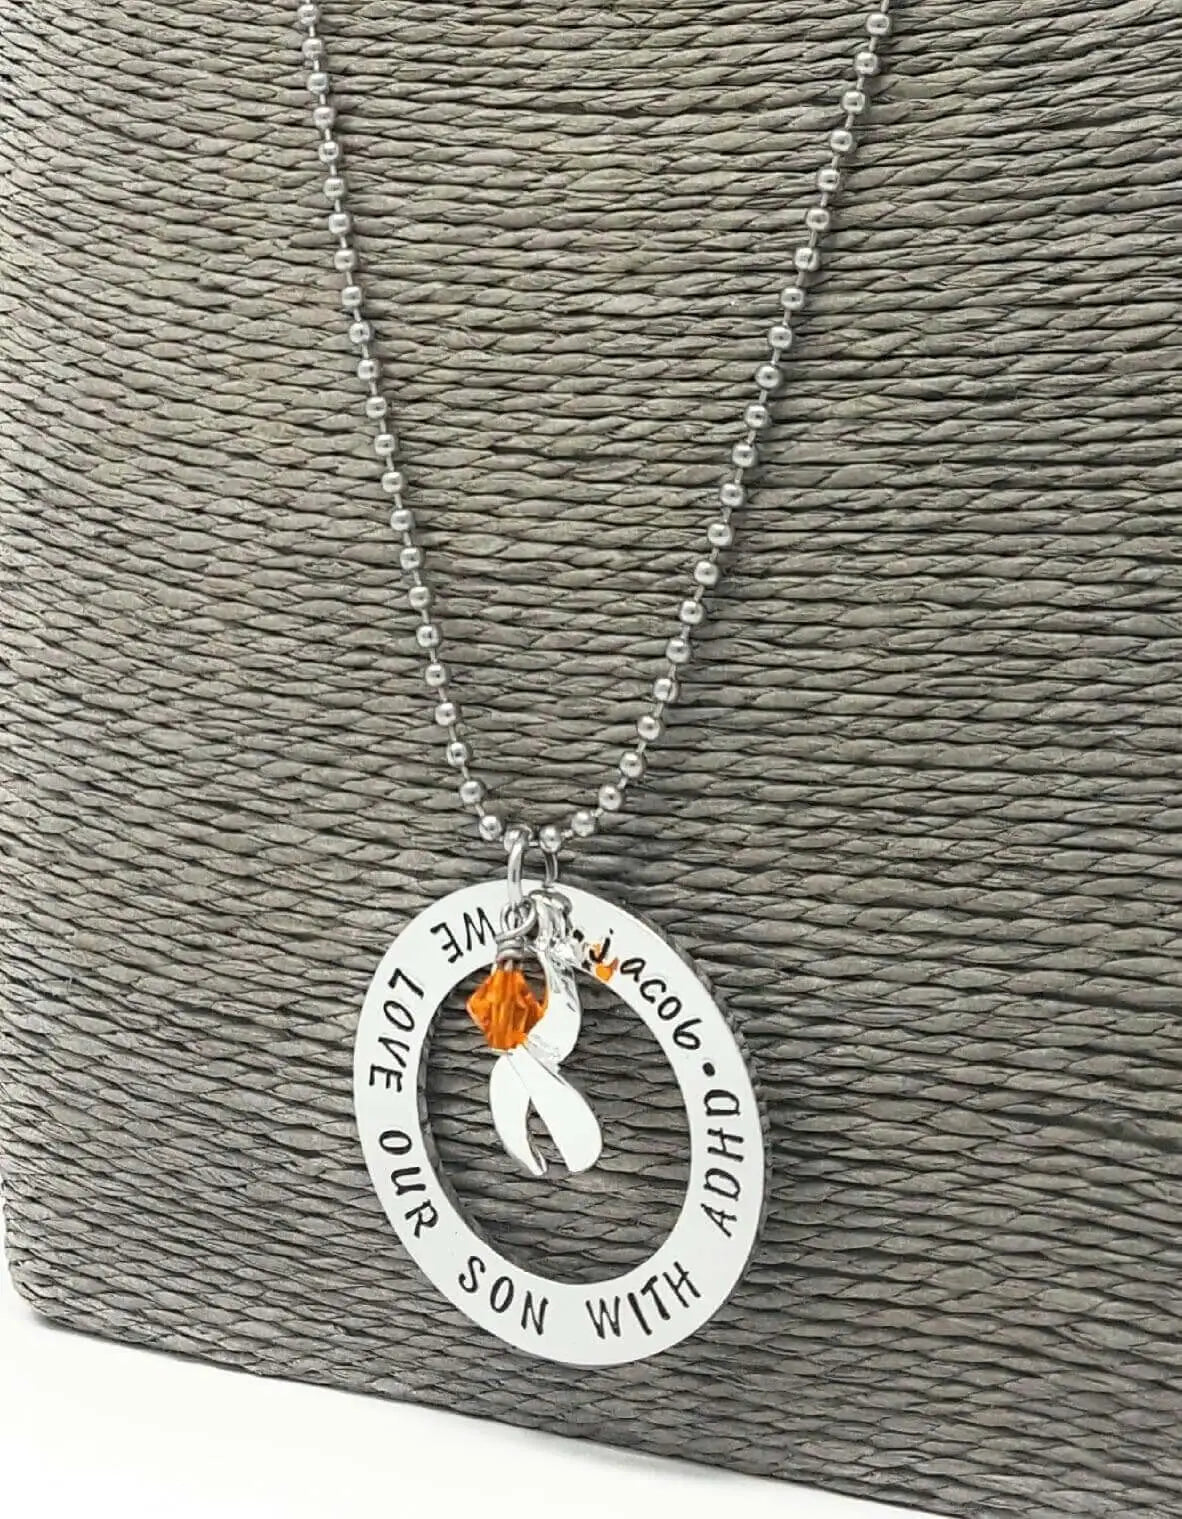 A.D.H.D Awareness  I Love A Child With Adhd necklace  Adhd Jewelry  Purple Cause Jewelry, Necklaces, HandmadeLoveStories, HandmadeLoveStories , [Handmade_Love_Stories], [Hand_Stamped_Jewelry], [Etsy_Stamped_Jewelry], [Etsy_Jewelry]